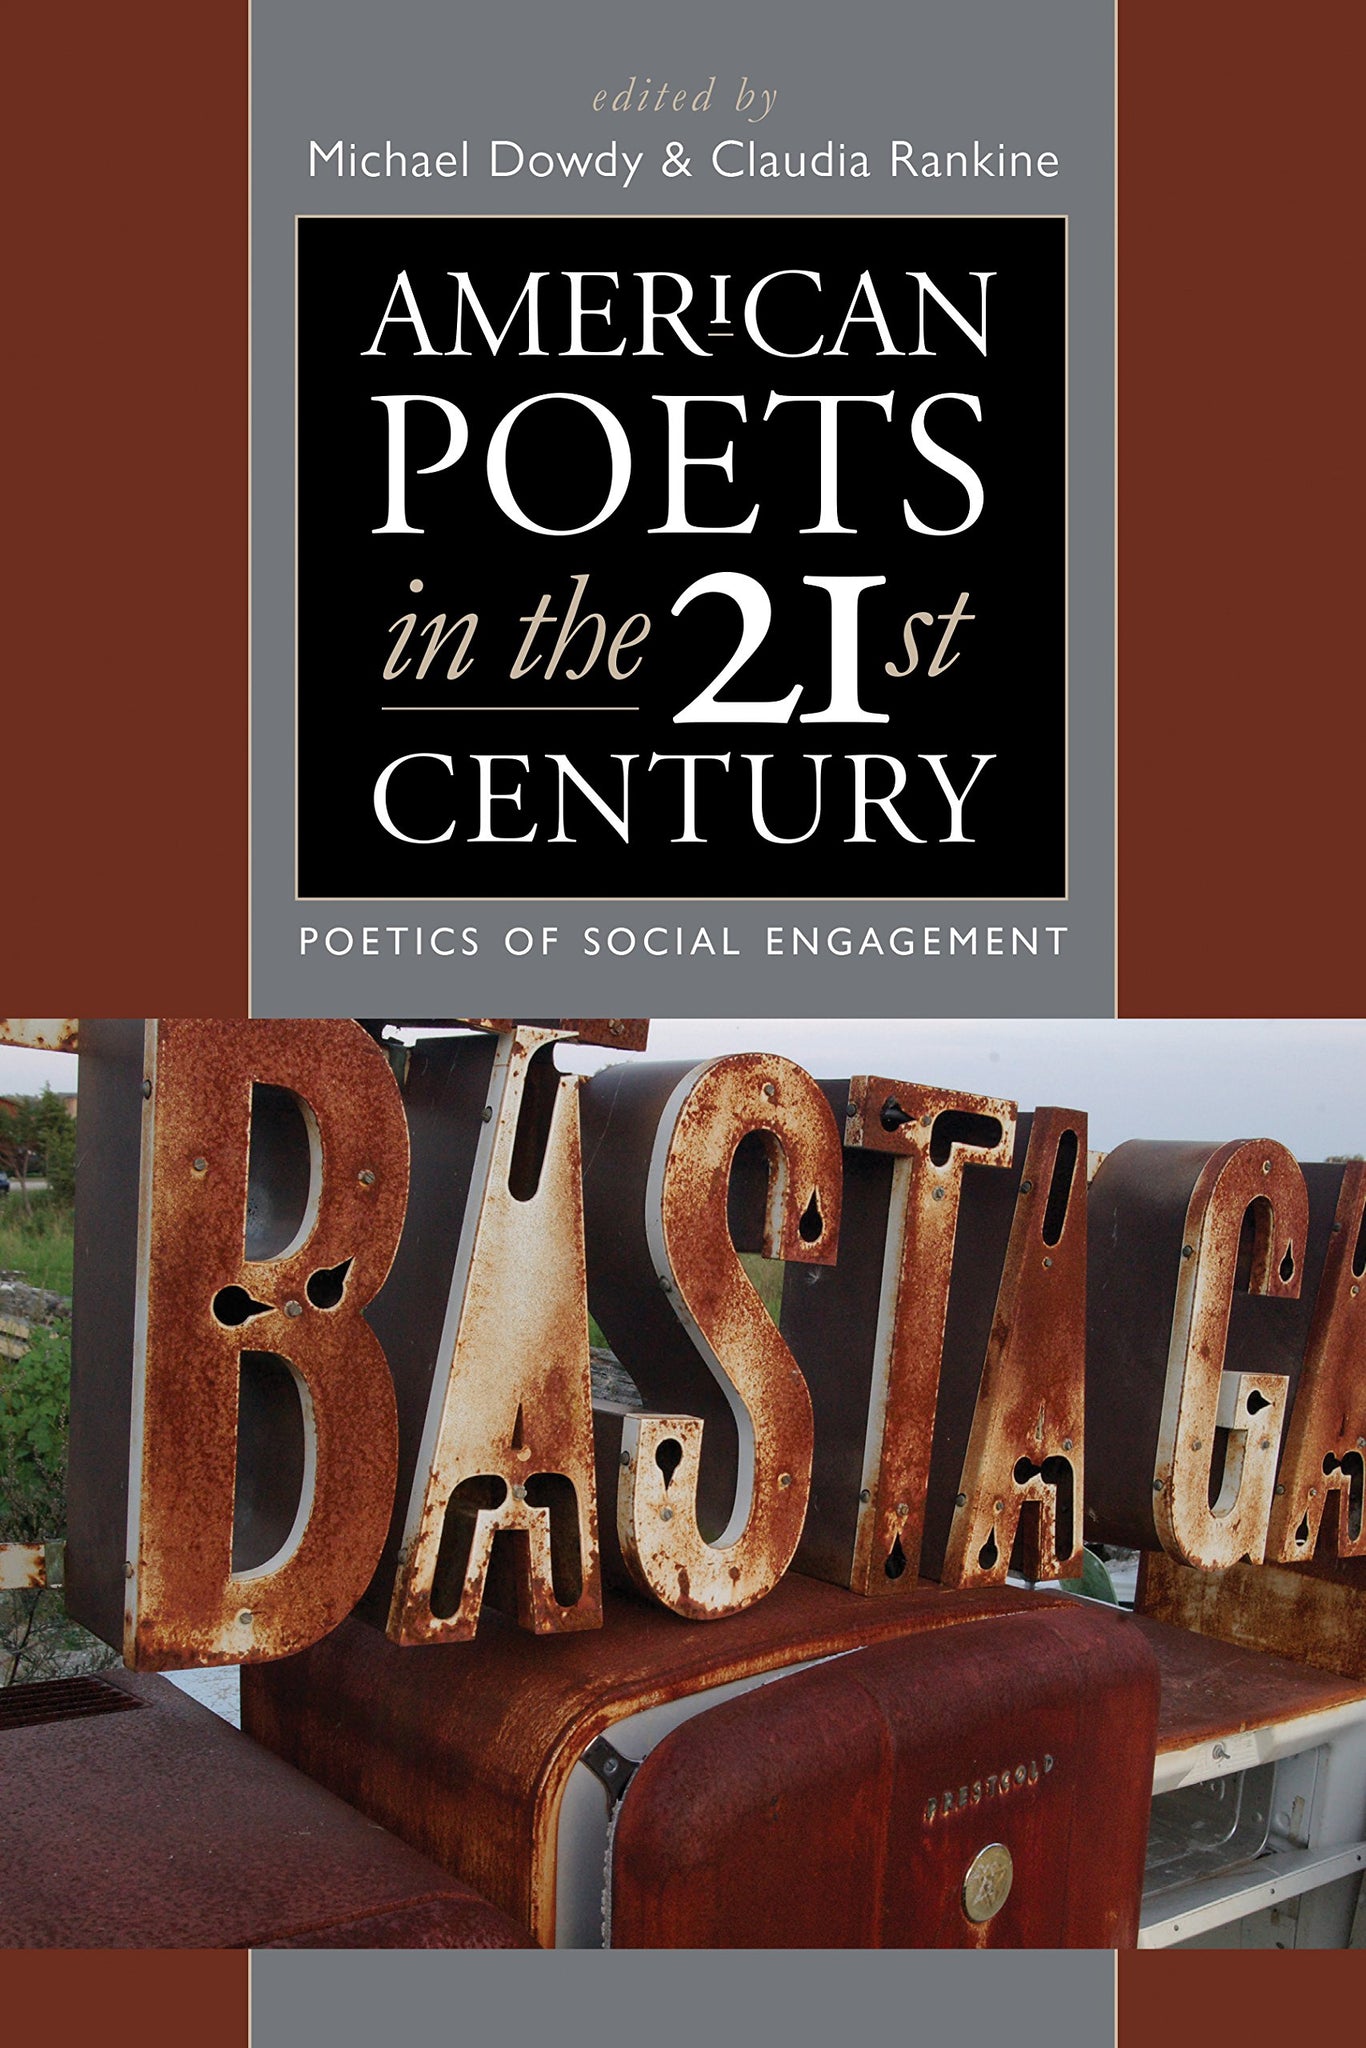 American Poets in the 21st Century: Poetics of Social Engagement